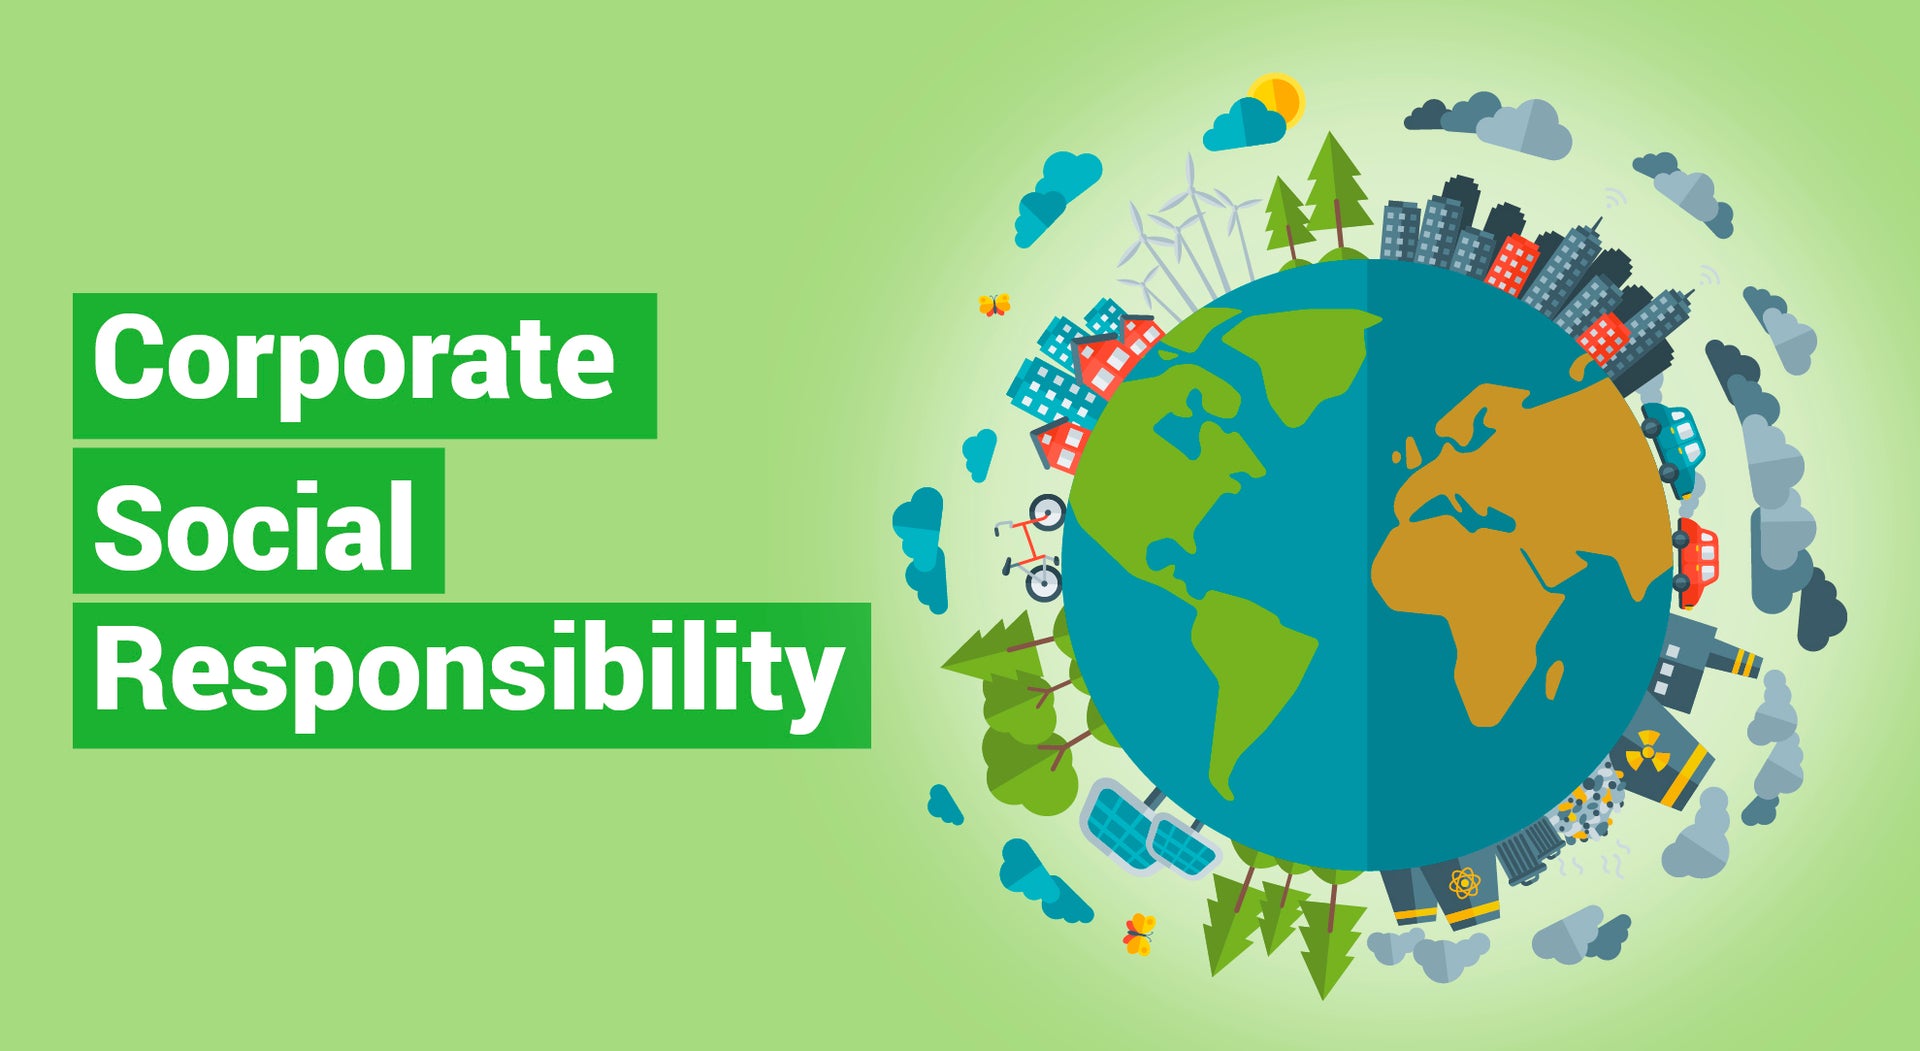 Sustainability and Corporate Social Responsibility: PECSS's Commitment